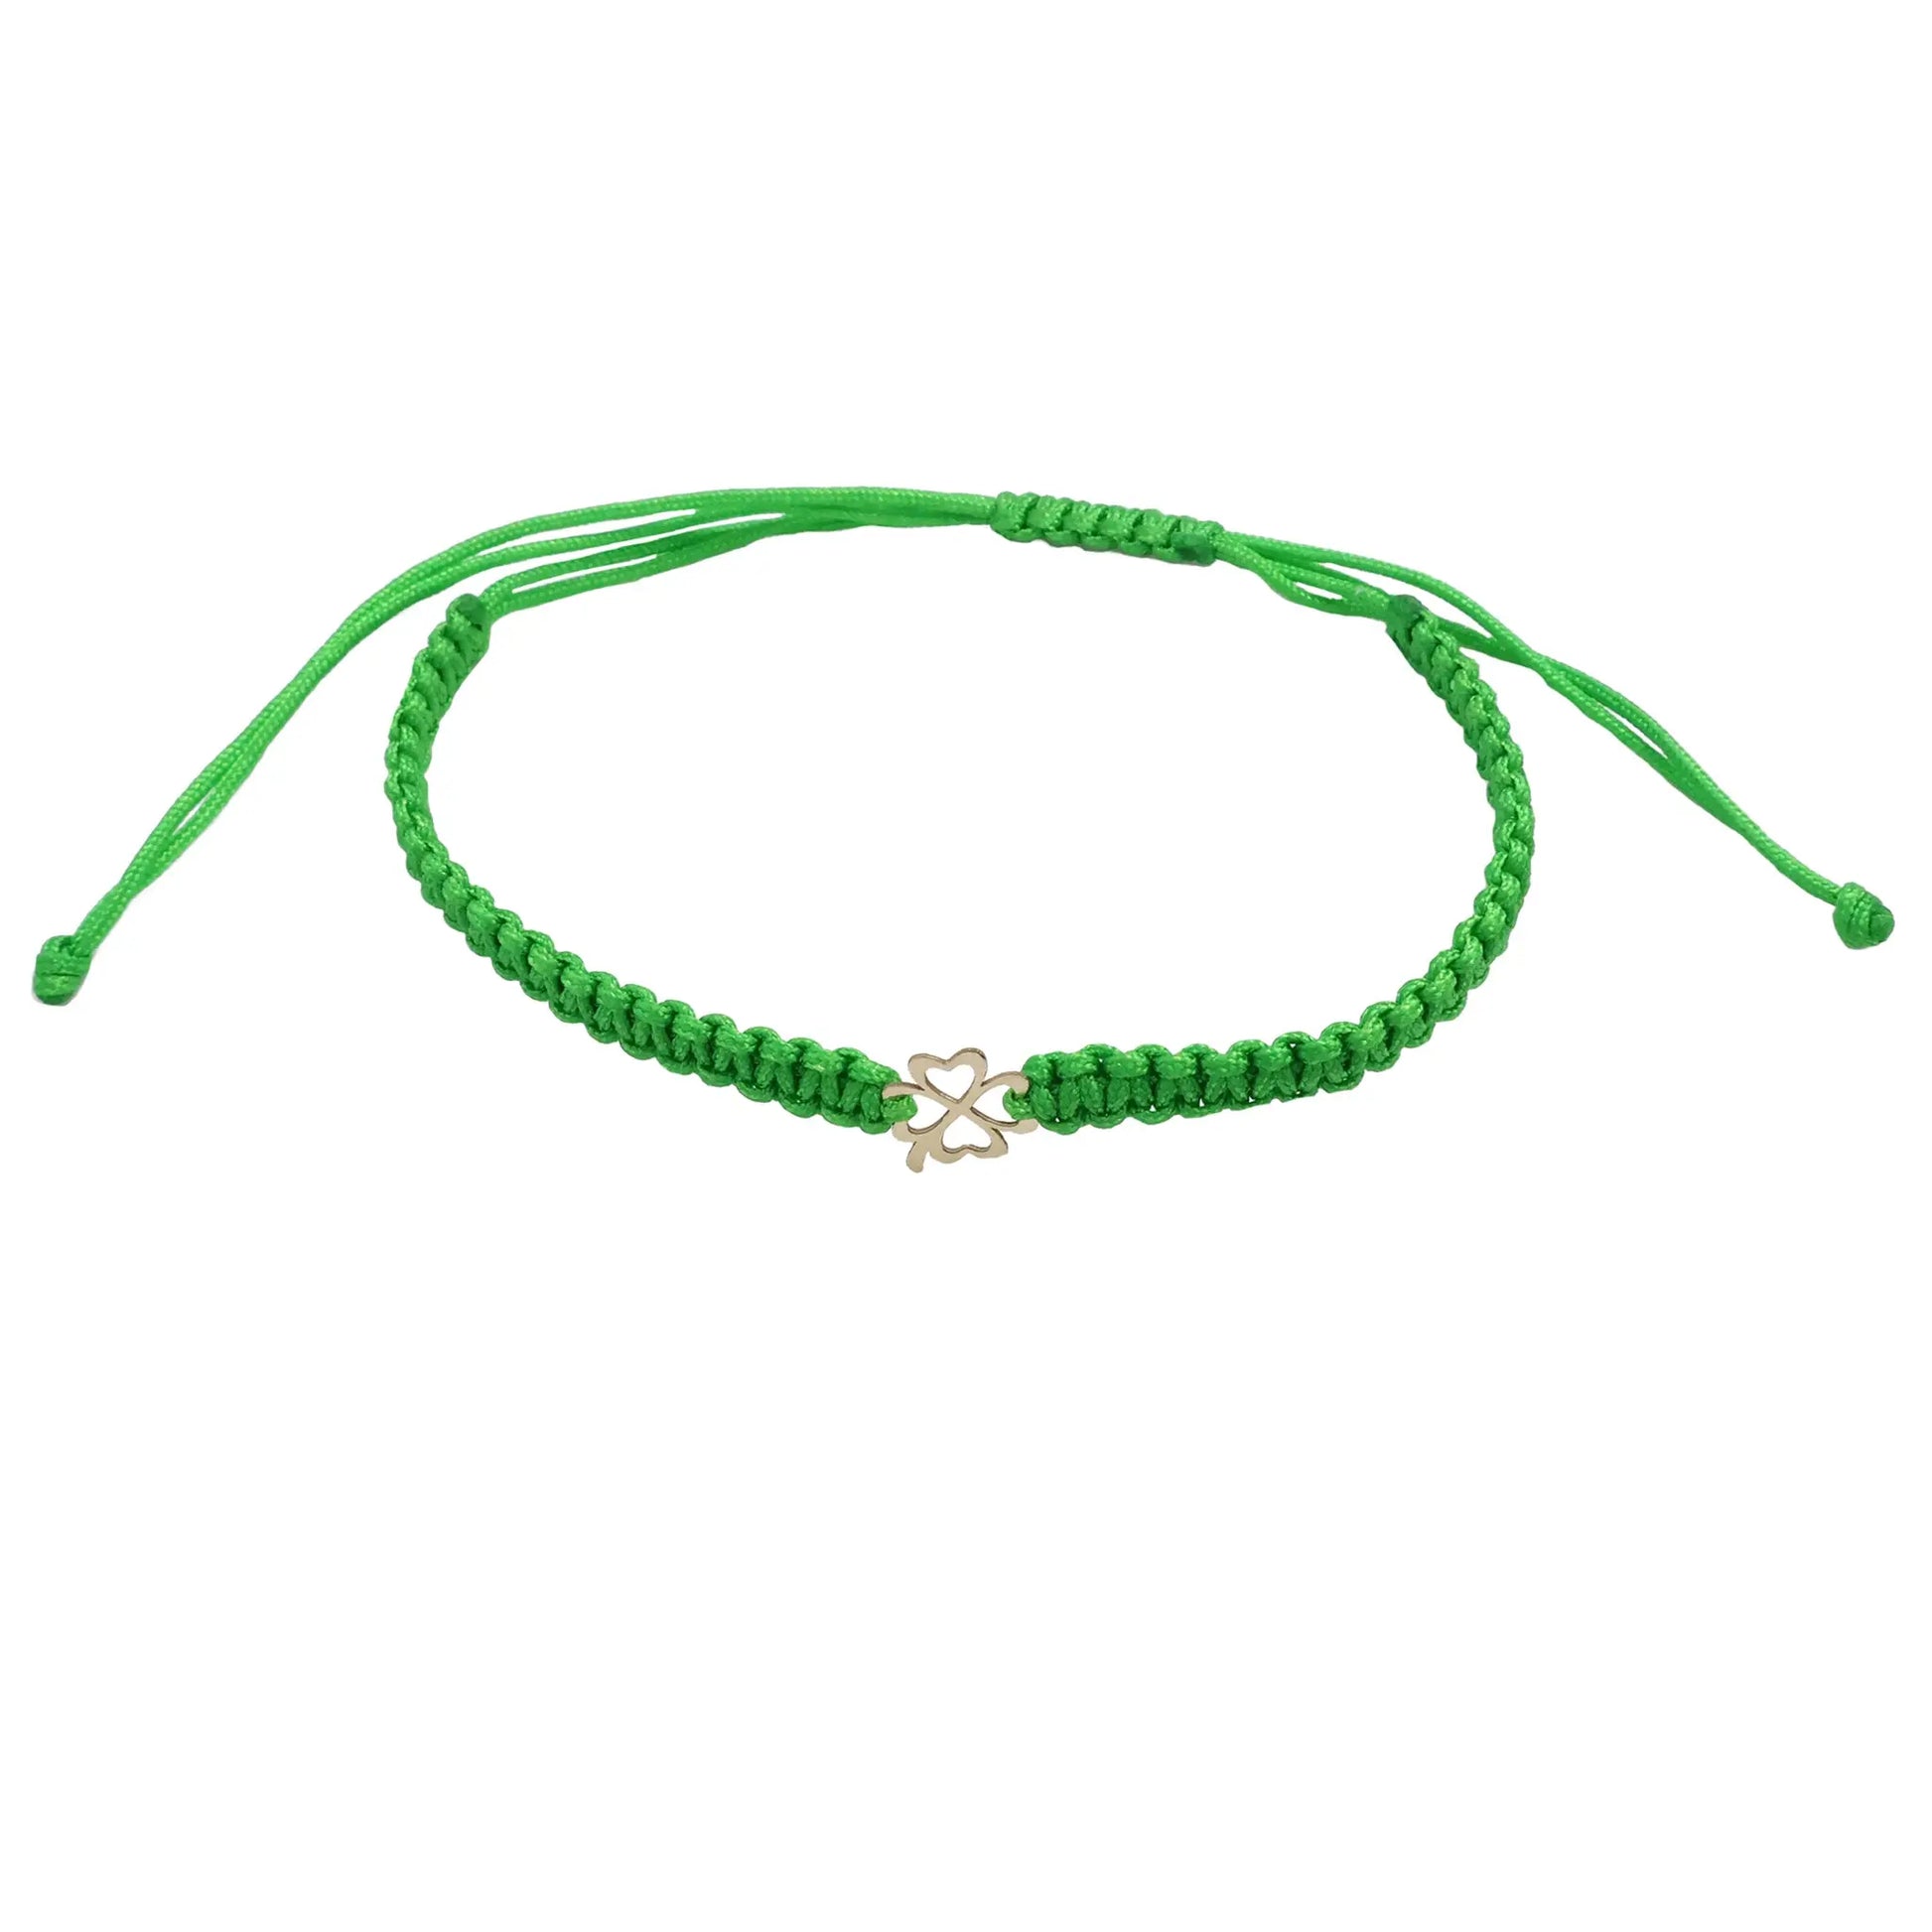 Bracelet with braided cord and a 14K solid gold four-leaf clover pendant Vega Lopez